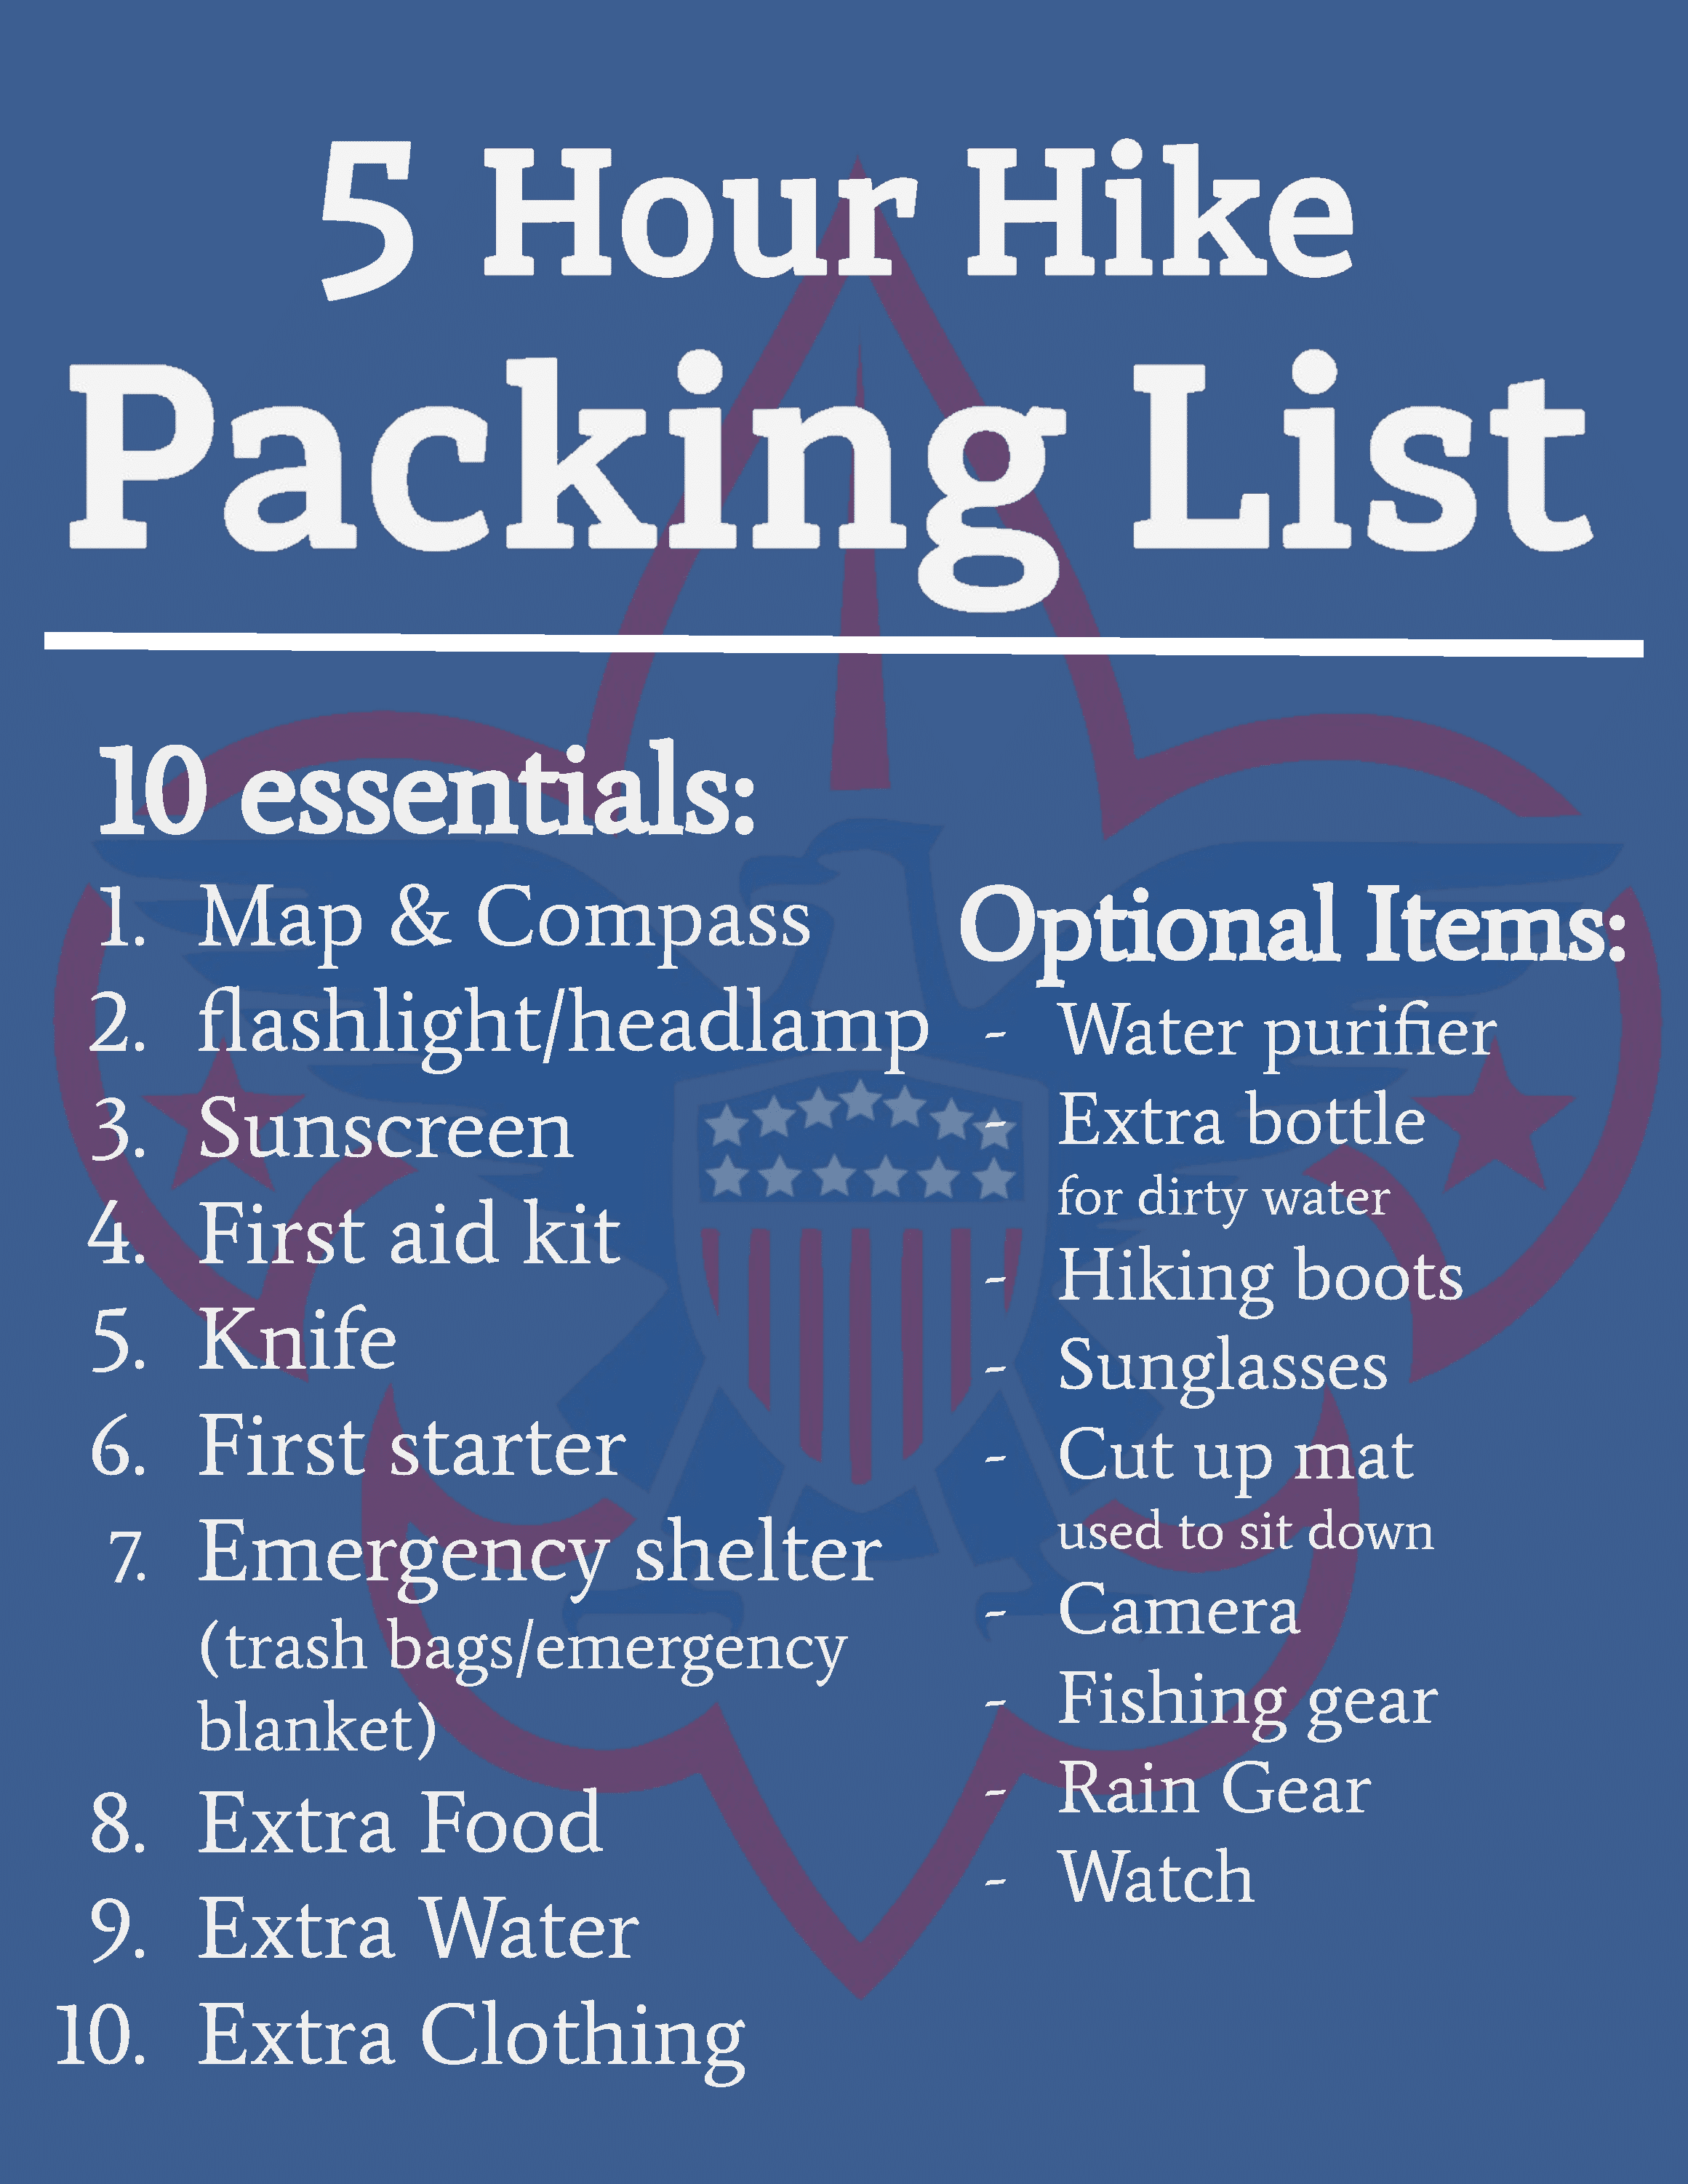 5hr hike - Packing List_Page_1